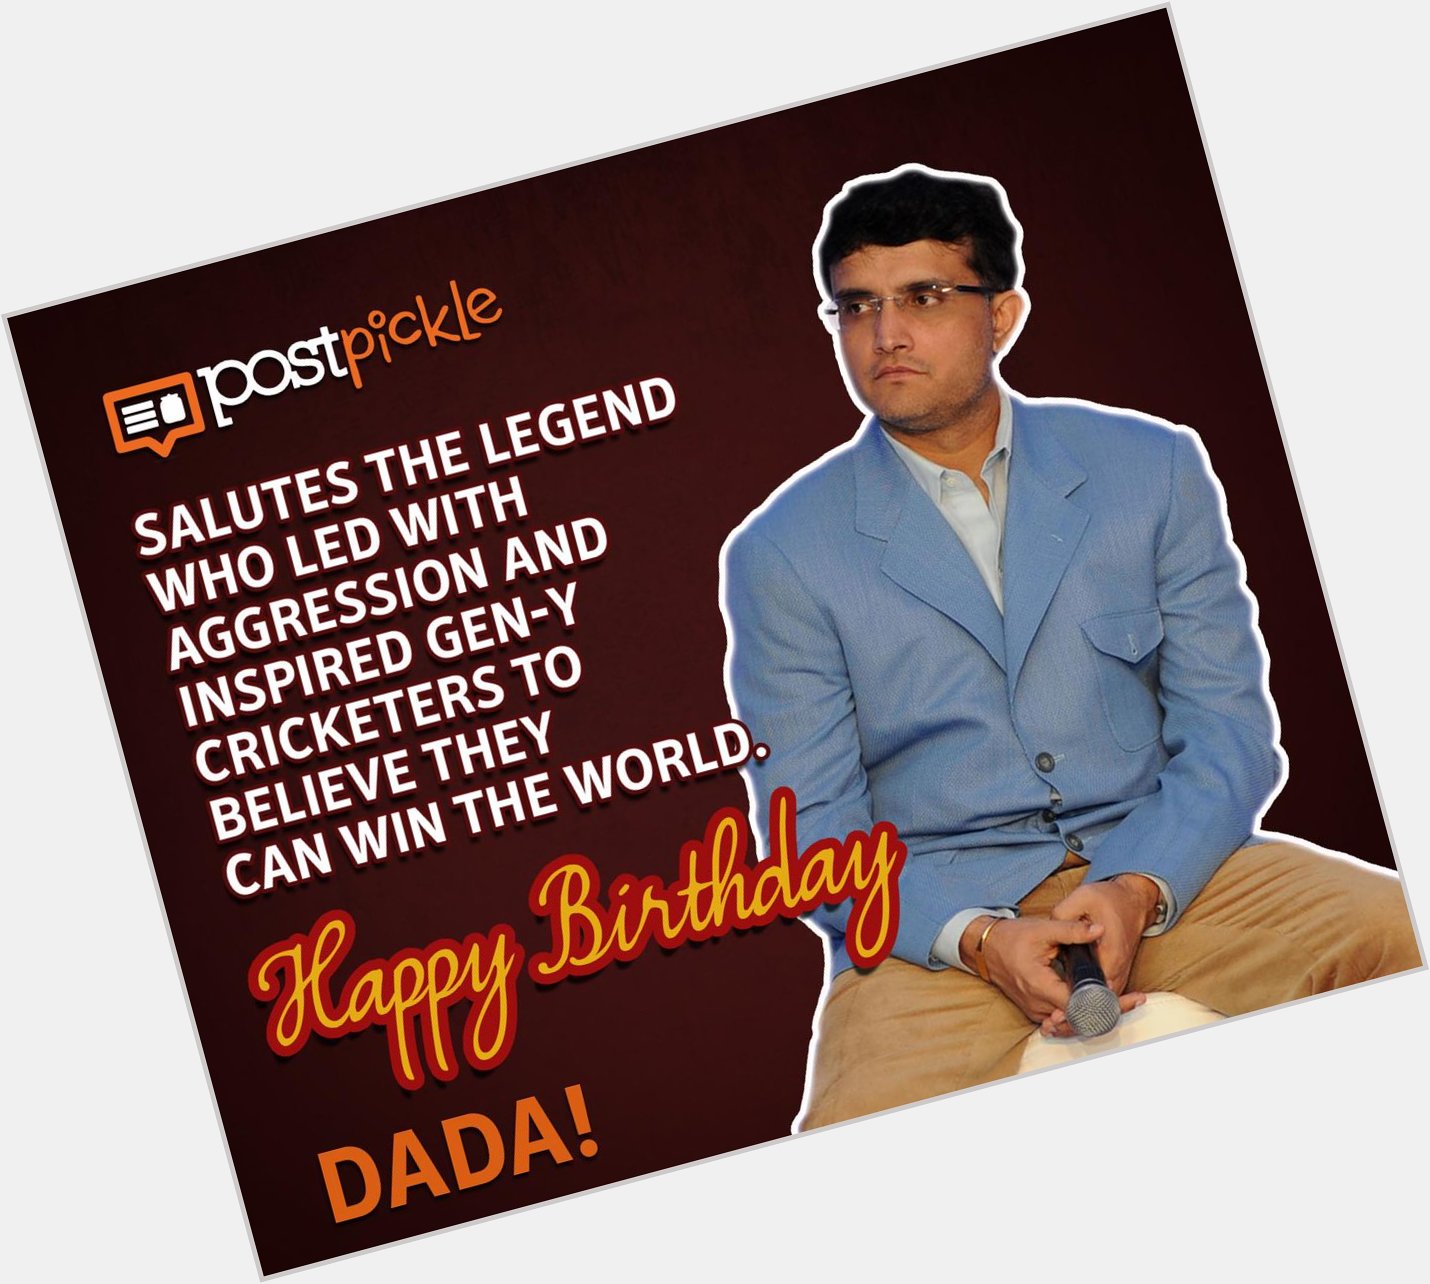 Postpickle wishes Former Indian Cricketer Sourav Ganguly a very Happy Birthday!  